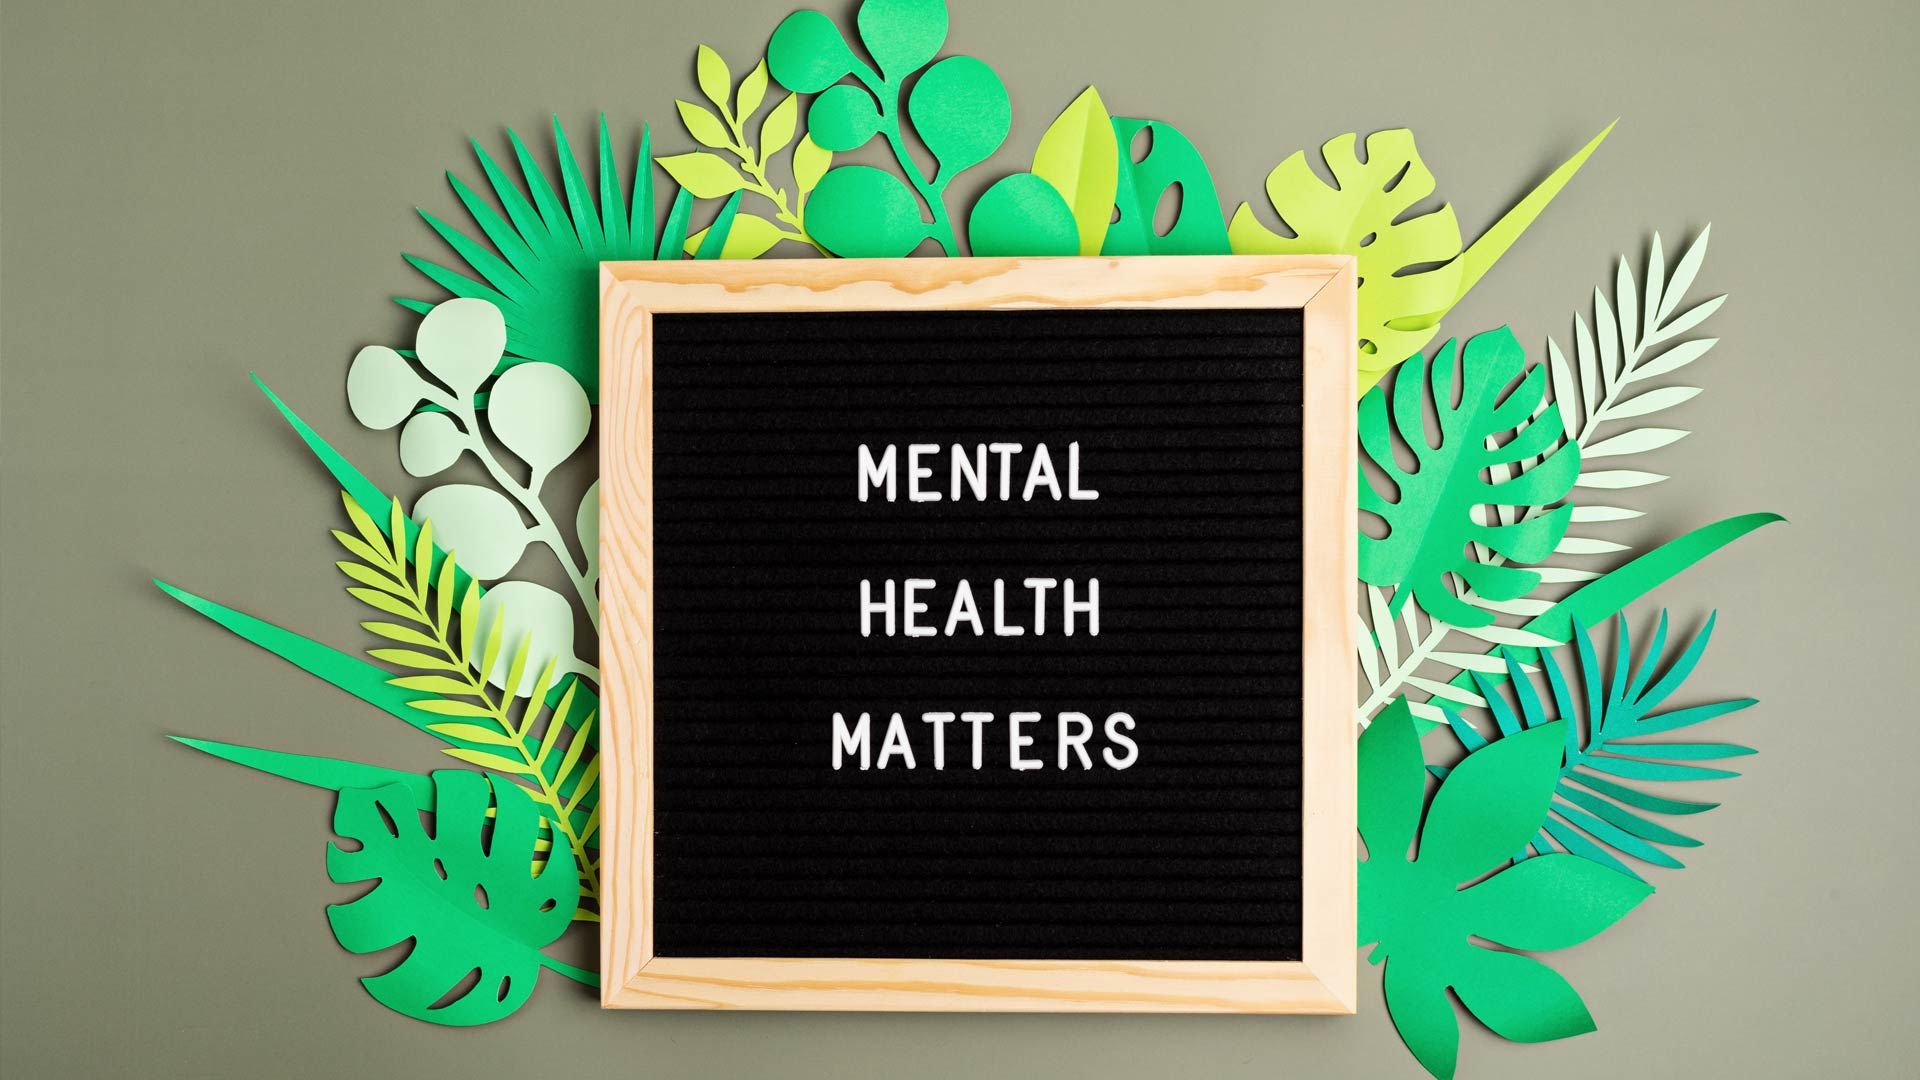 Tools to Thrive: How to Achieve Better Mental Health